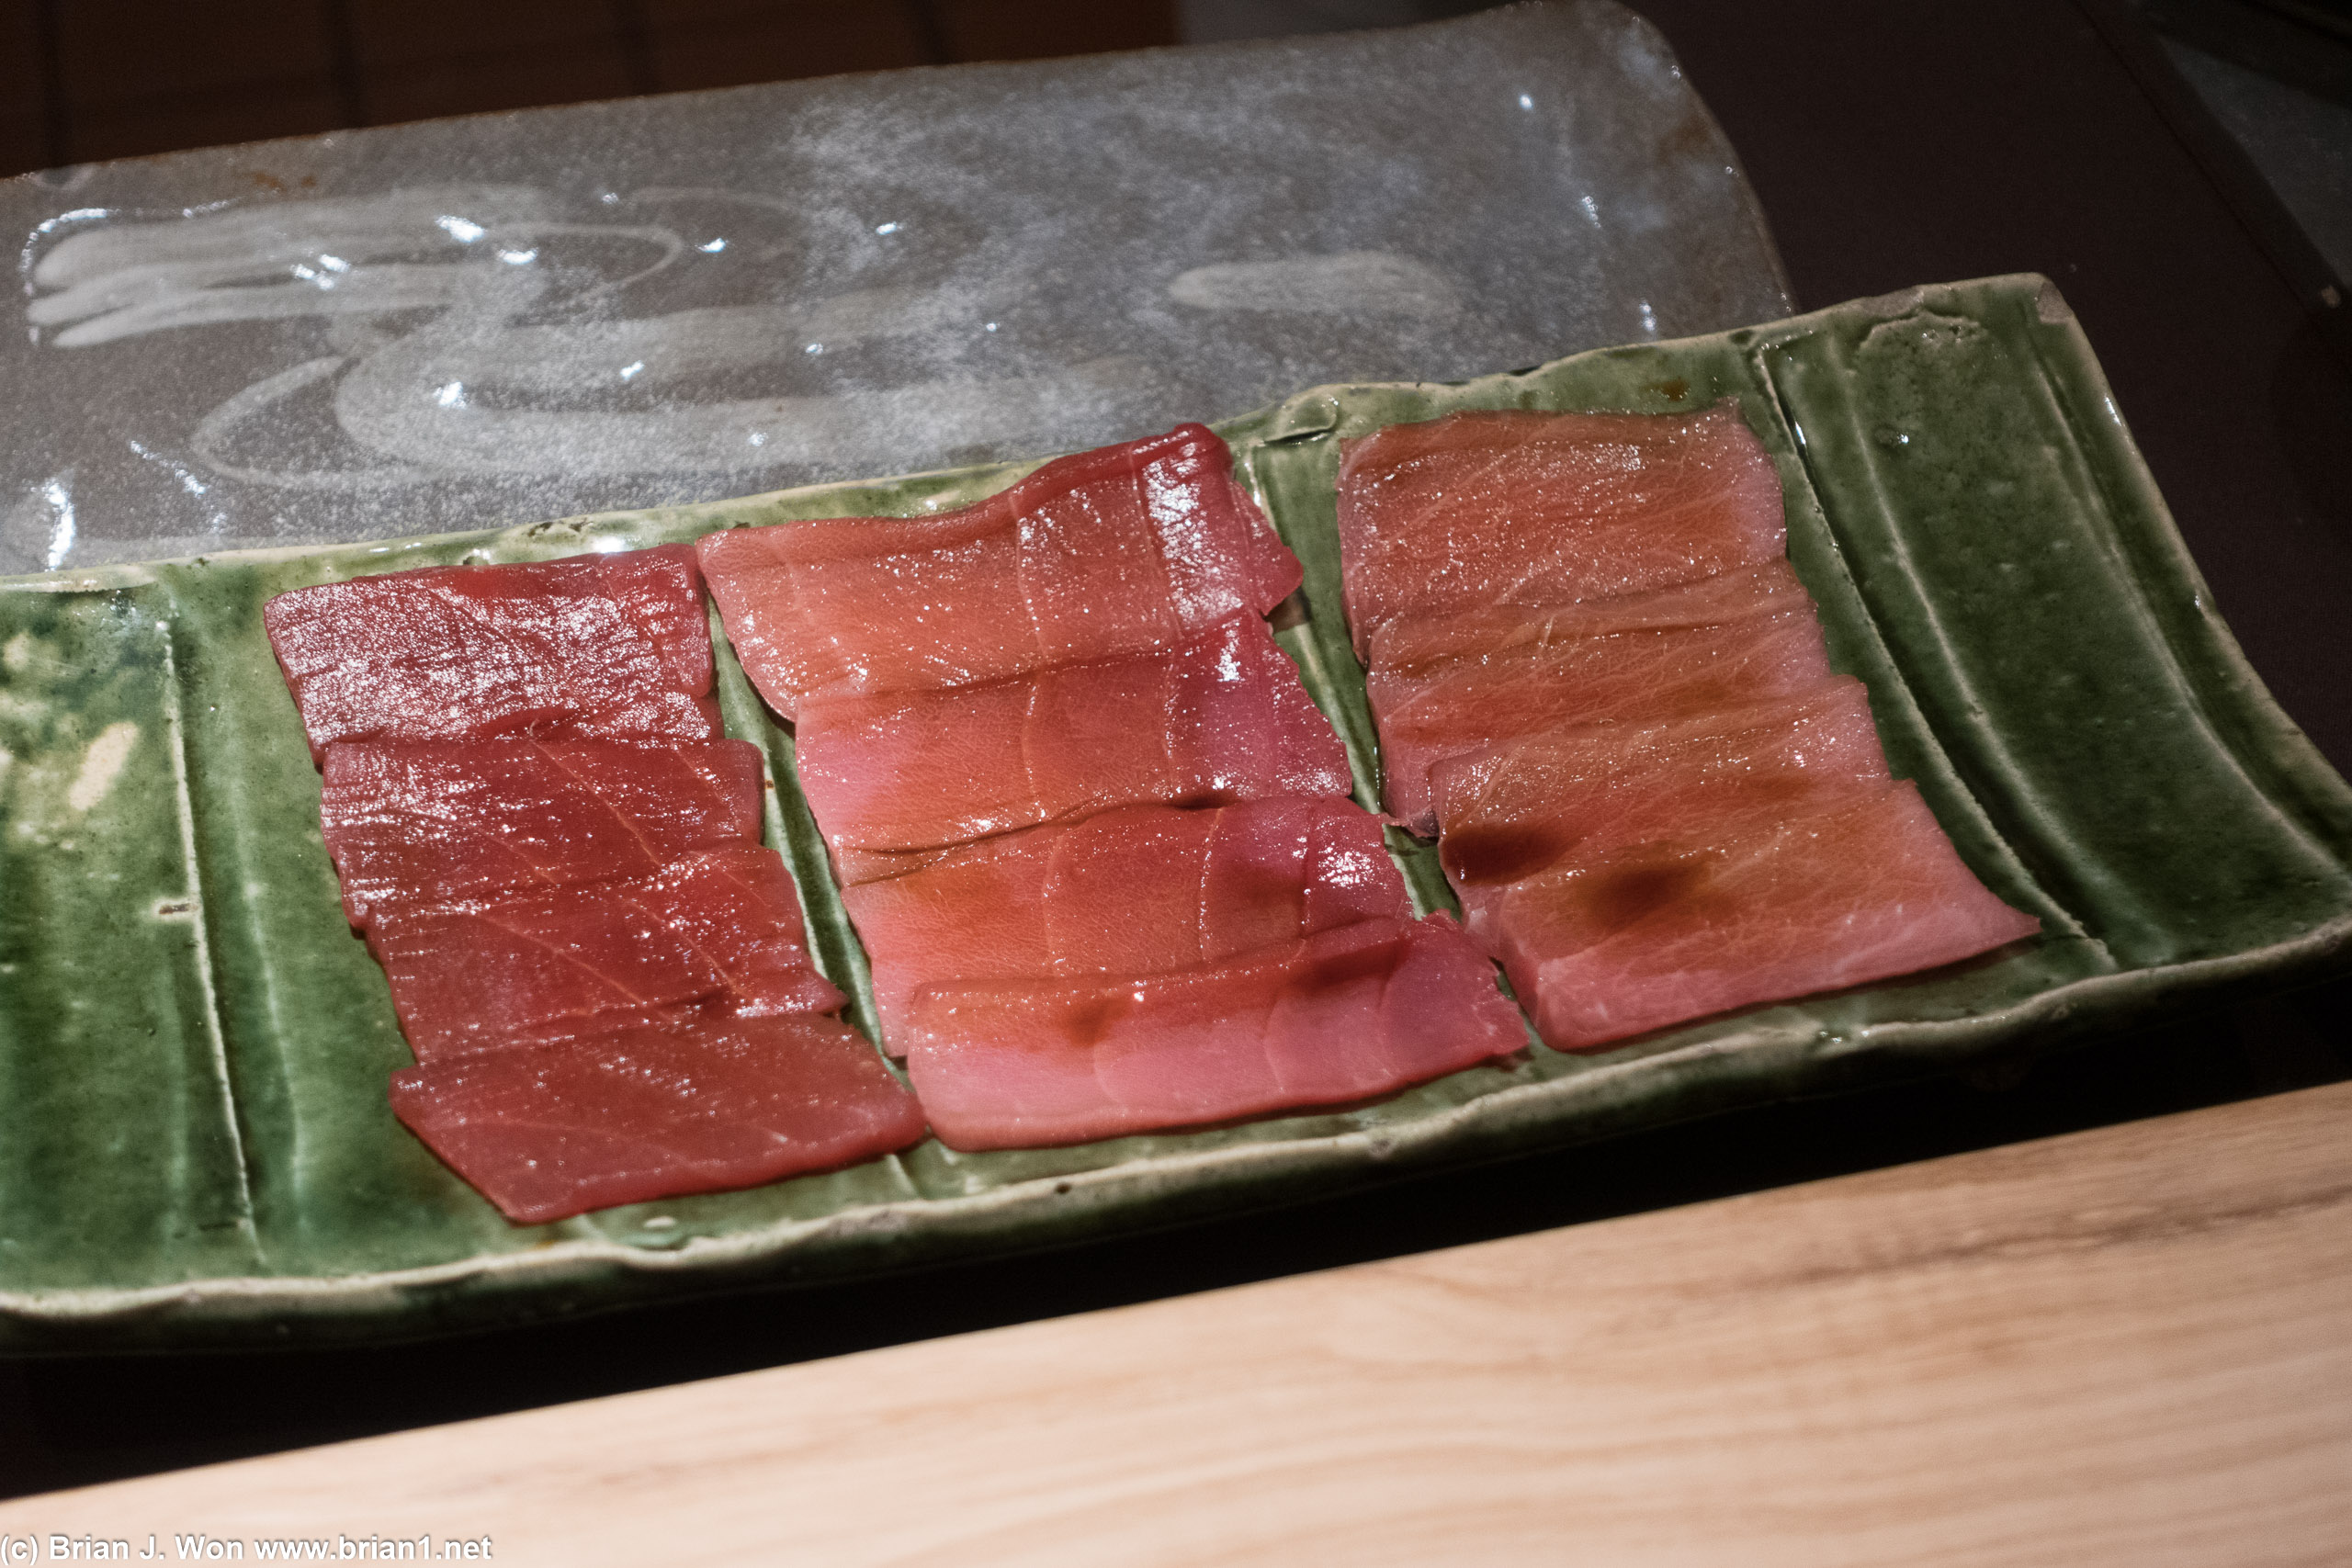 Marinated dry-aged bluefin.